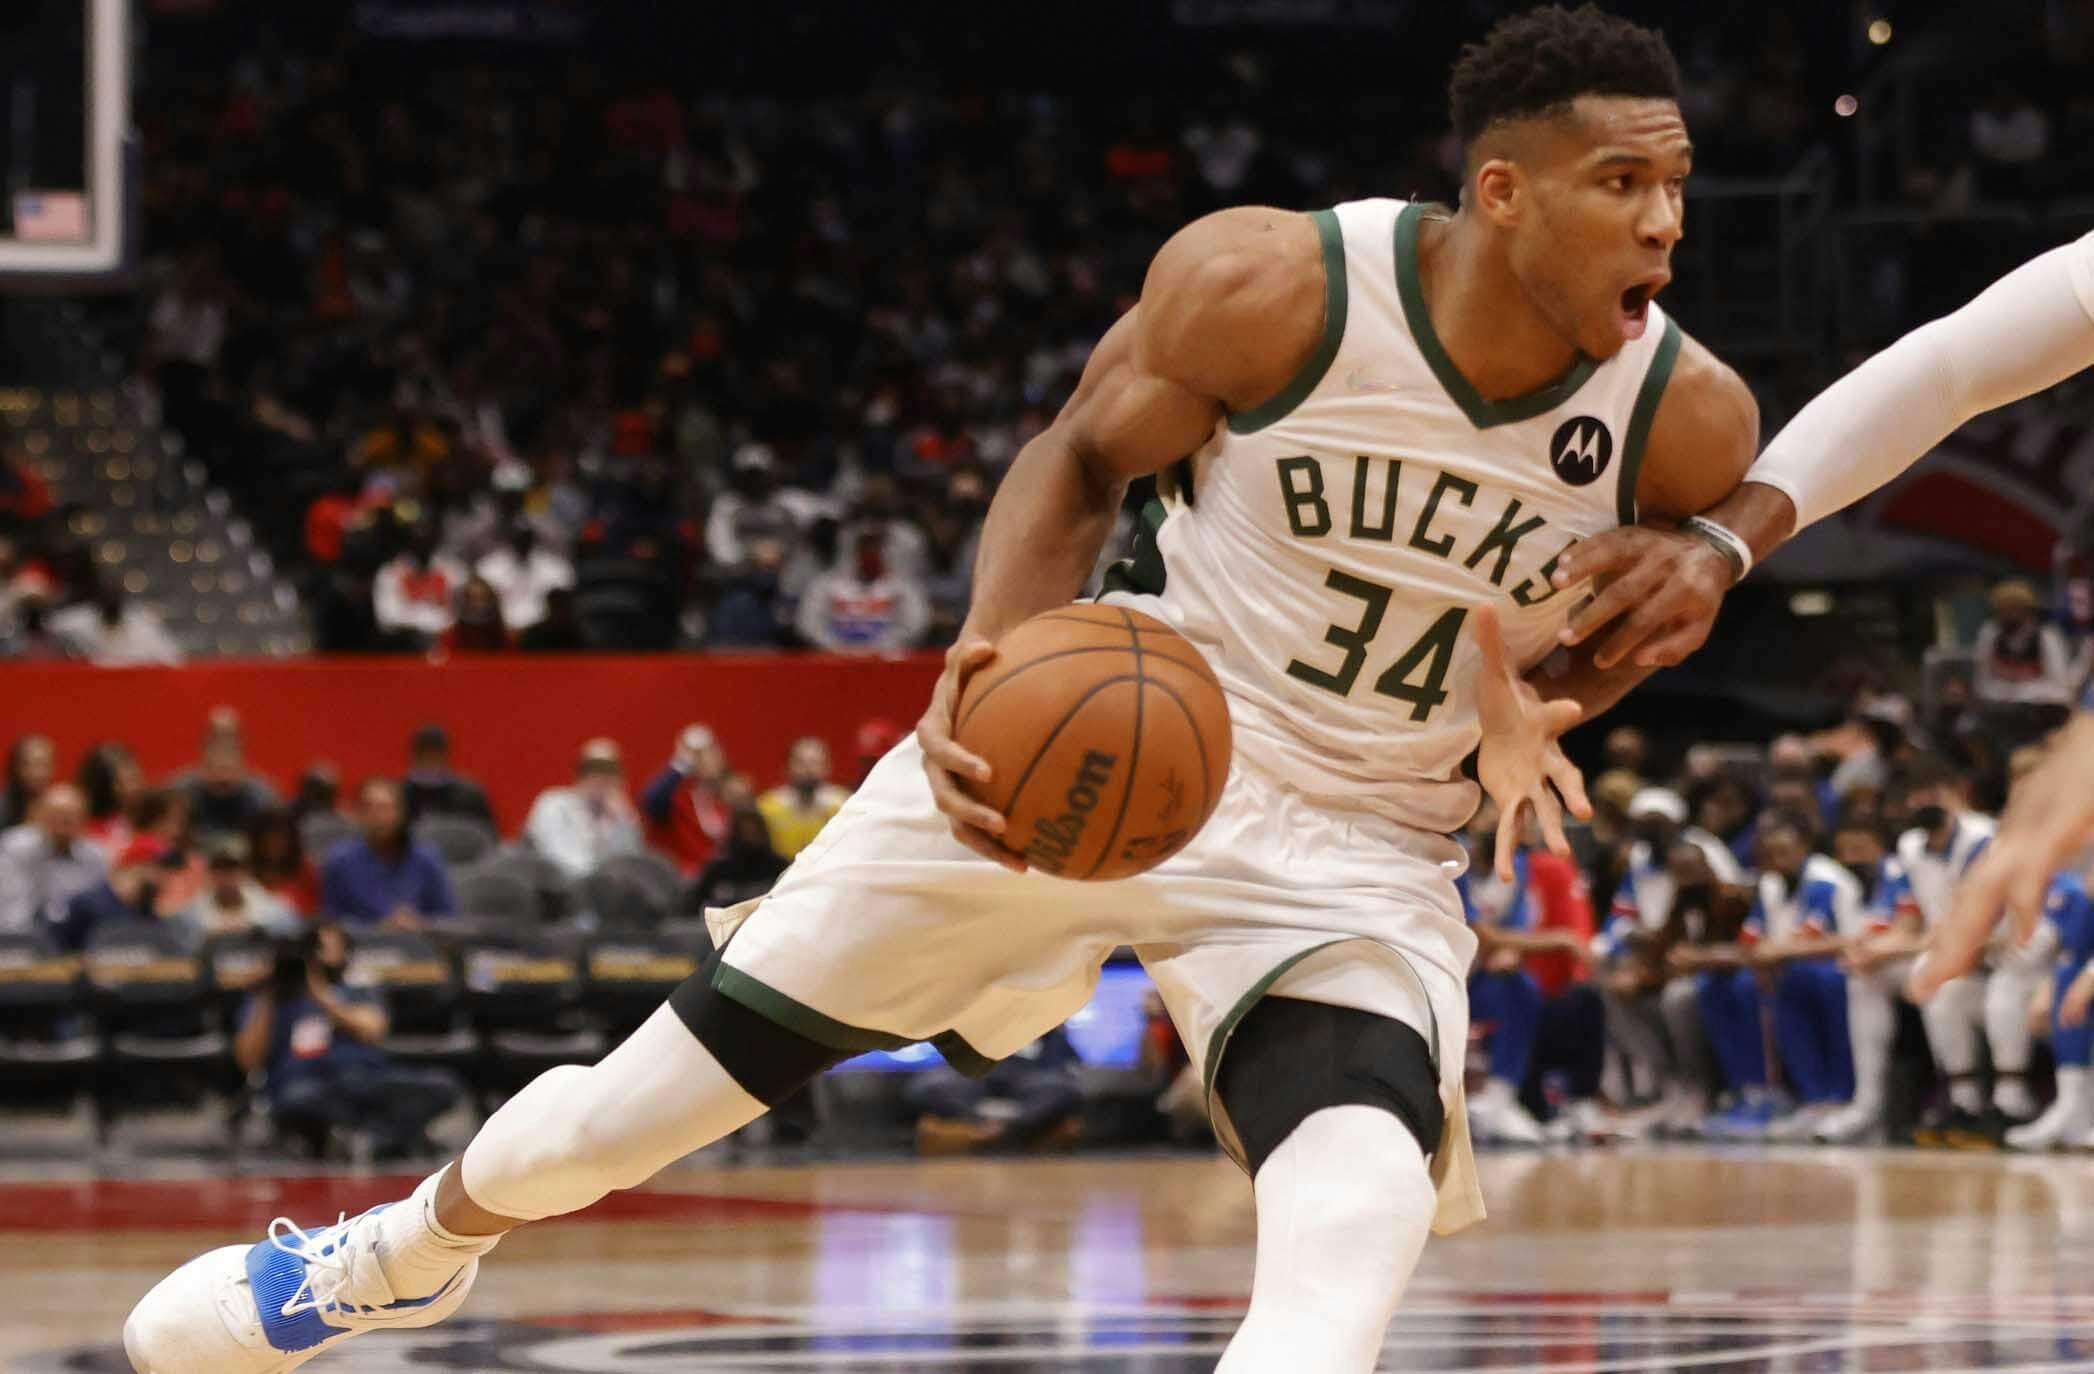 Milwaukee Bucks forward Giannis Antetokounmpo (34) drives to the basket as Washington Wizards center Daniel Gafford (21) defends during the second quarter at Capital One Arena.